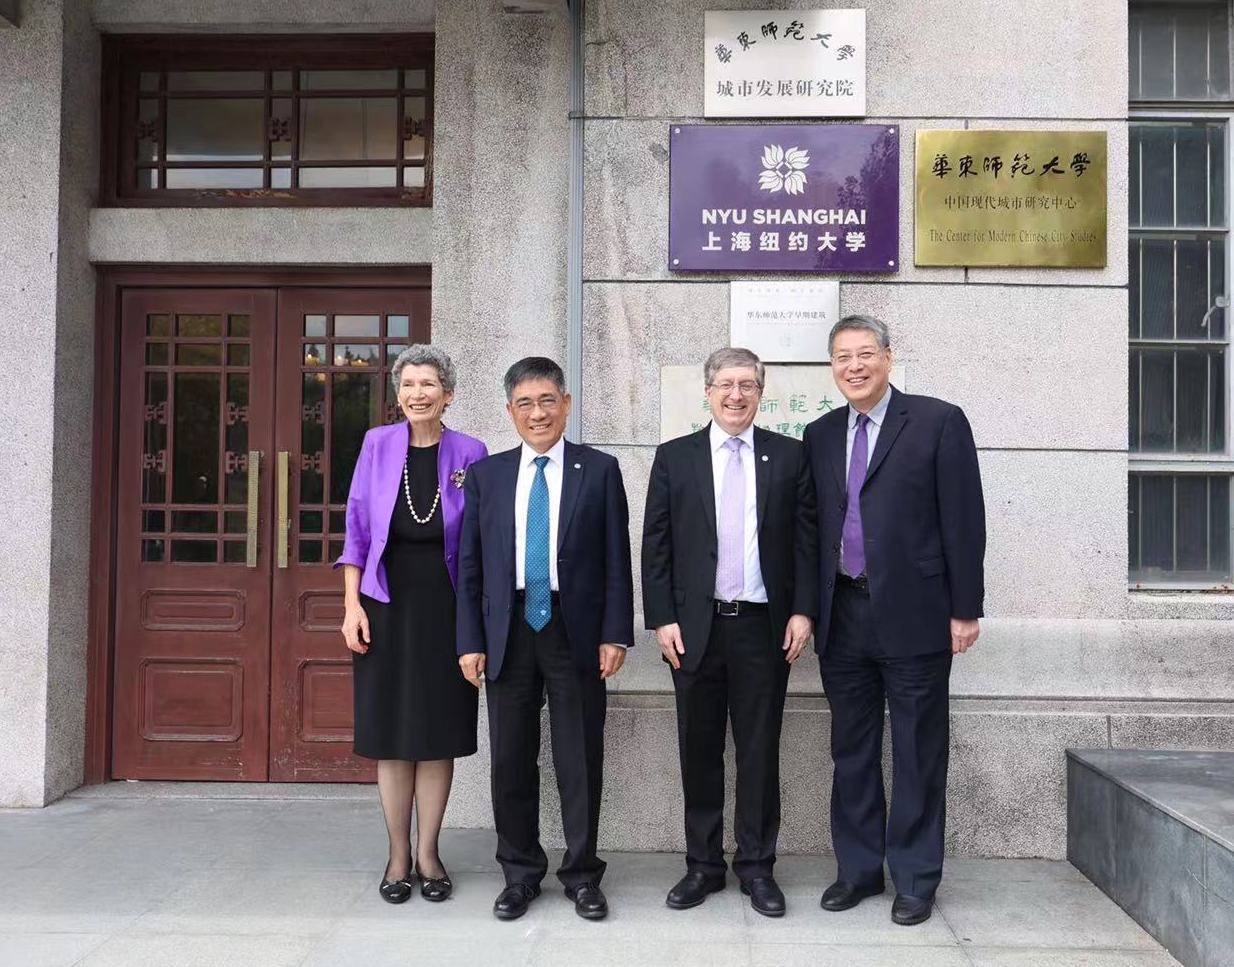 Leaders stand in front of small "NYU Shanghai" sign on building's facade